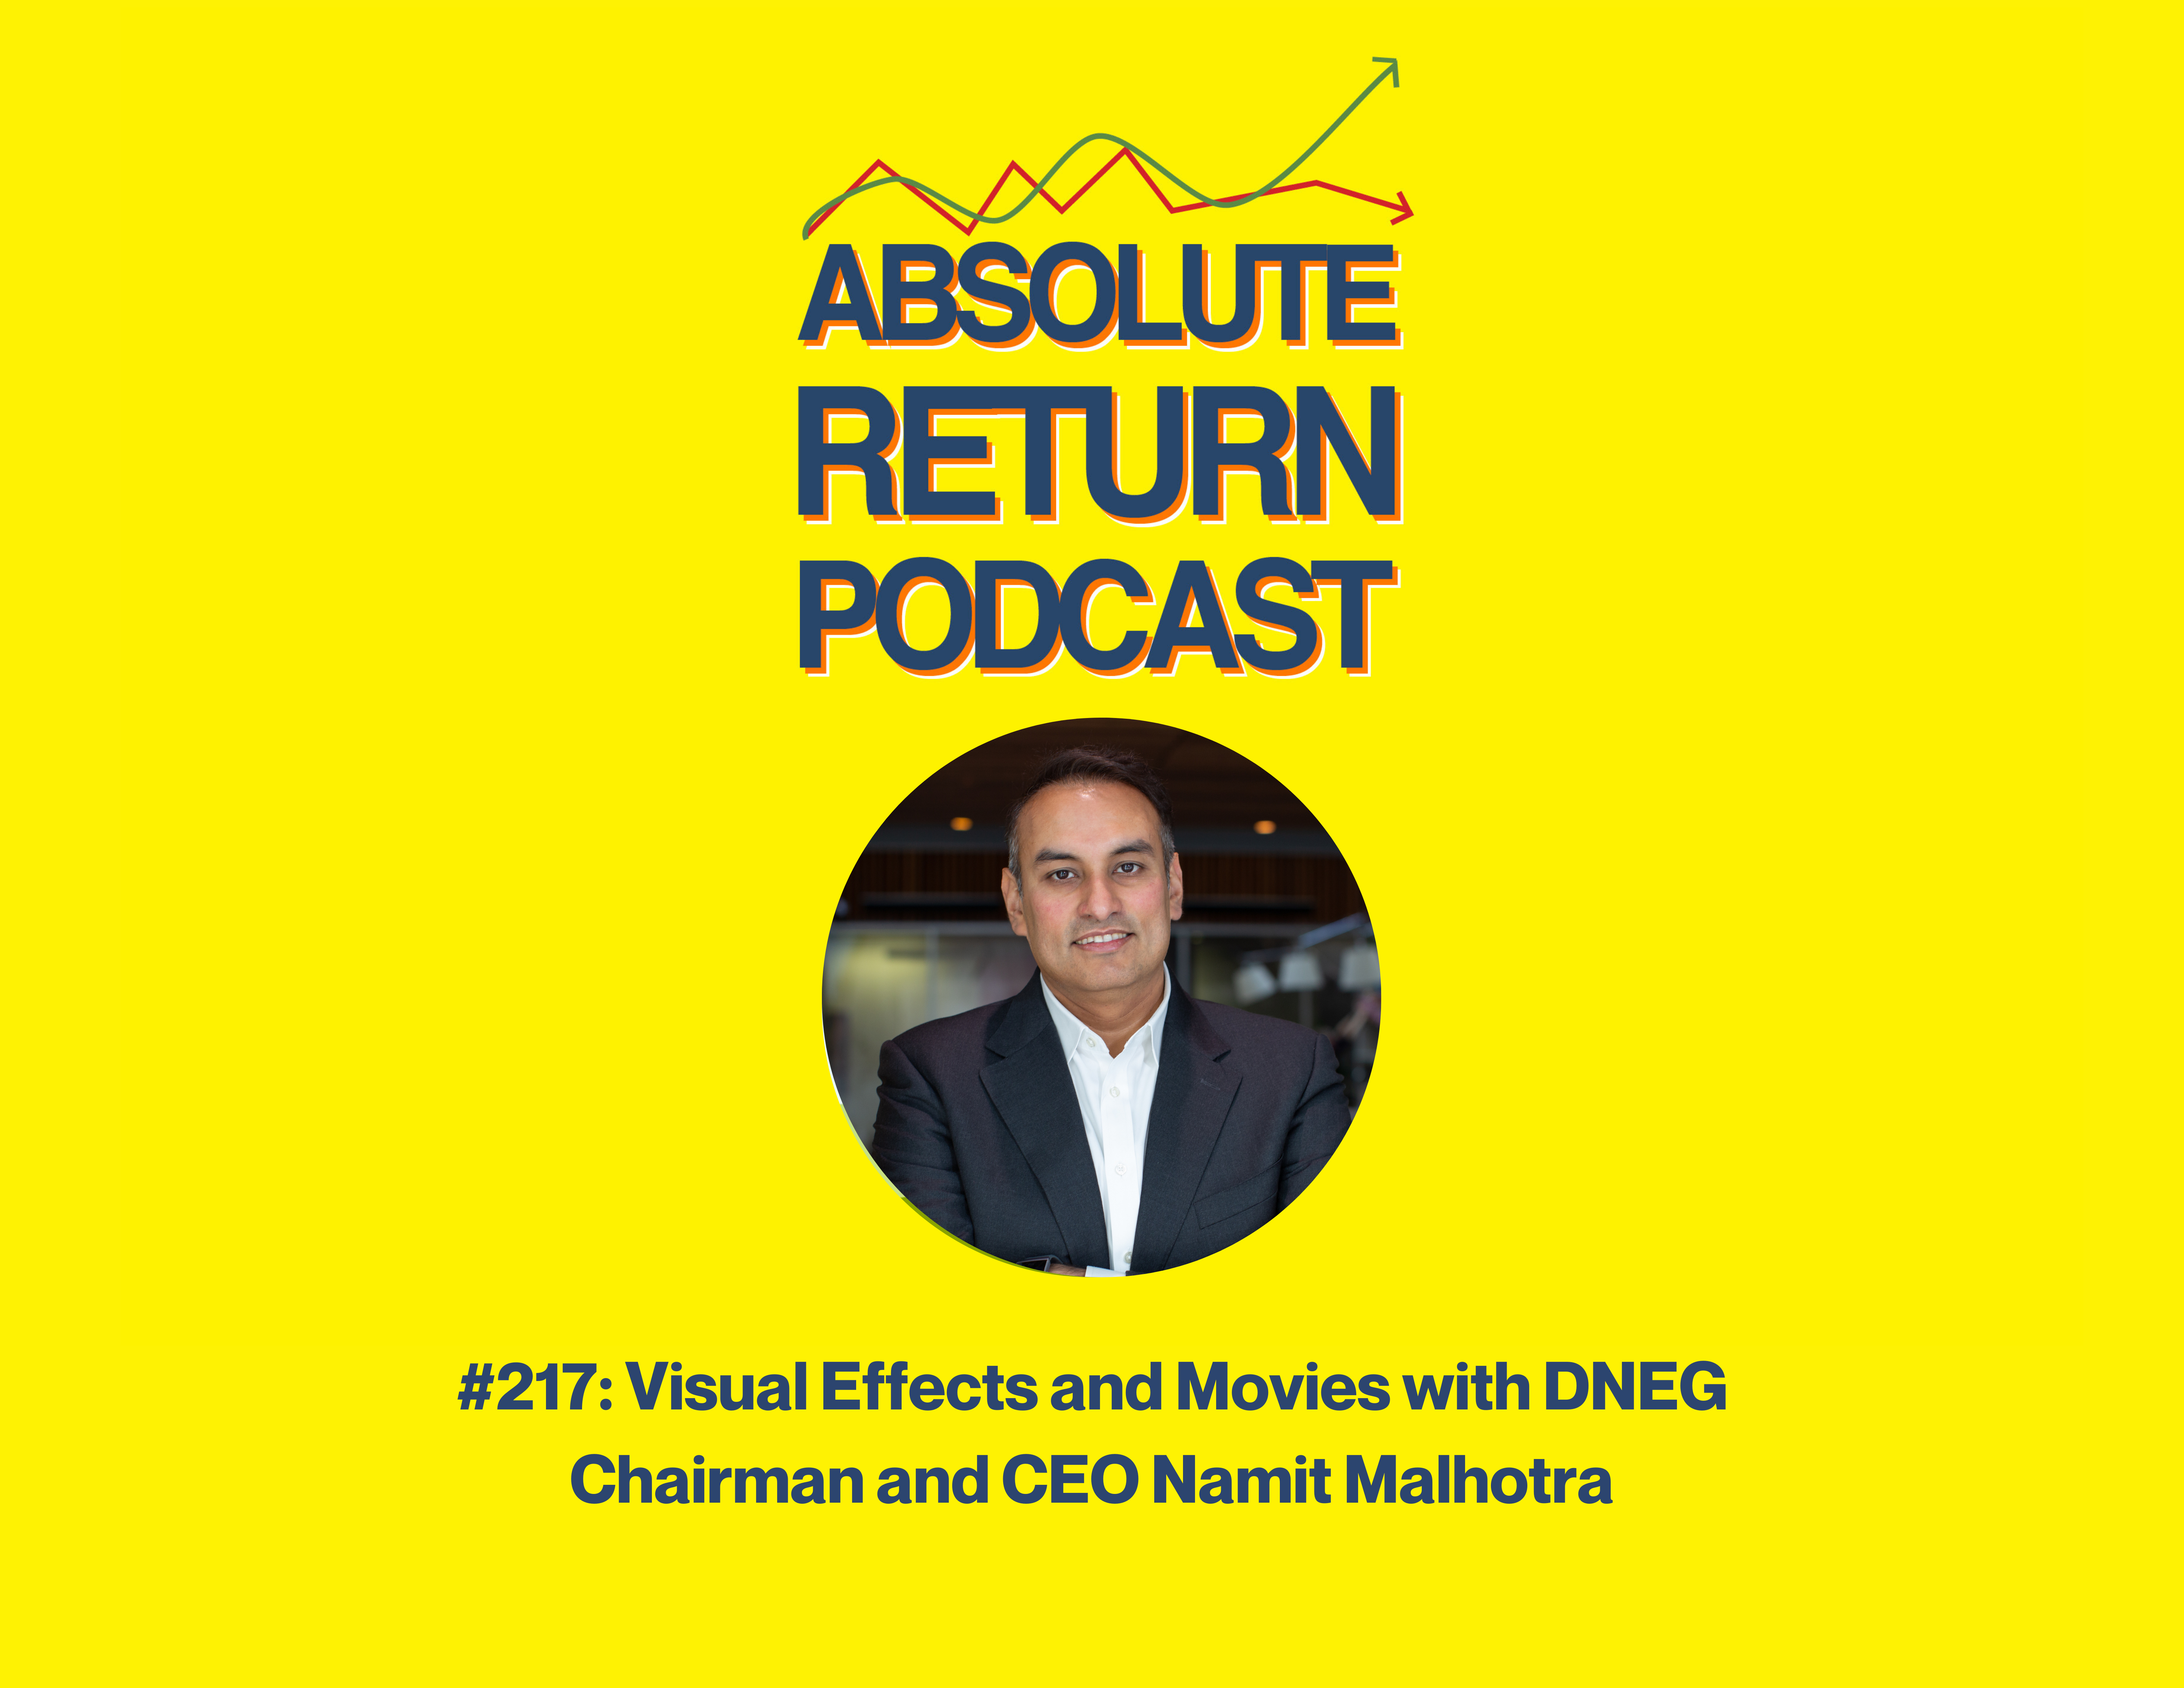 Absolute Return Podcast #217: Visual Effects and Movies with DNEG Chairman and CEO Namit Malhotra